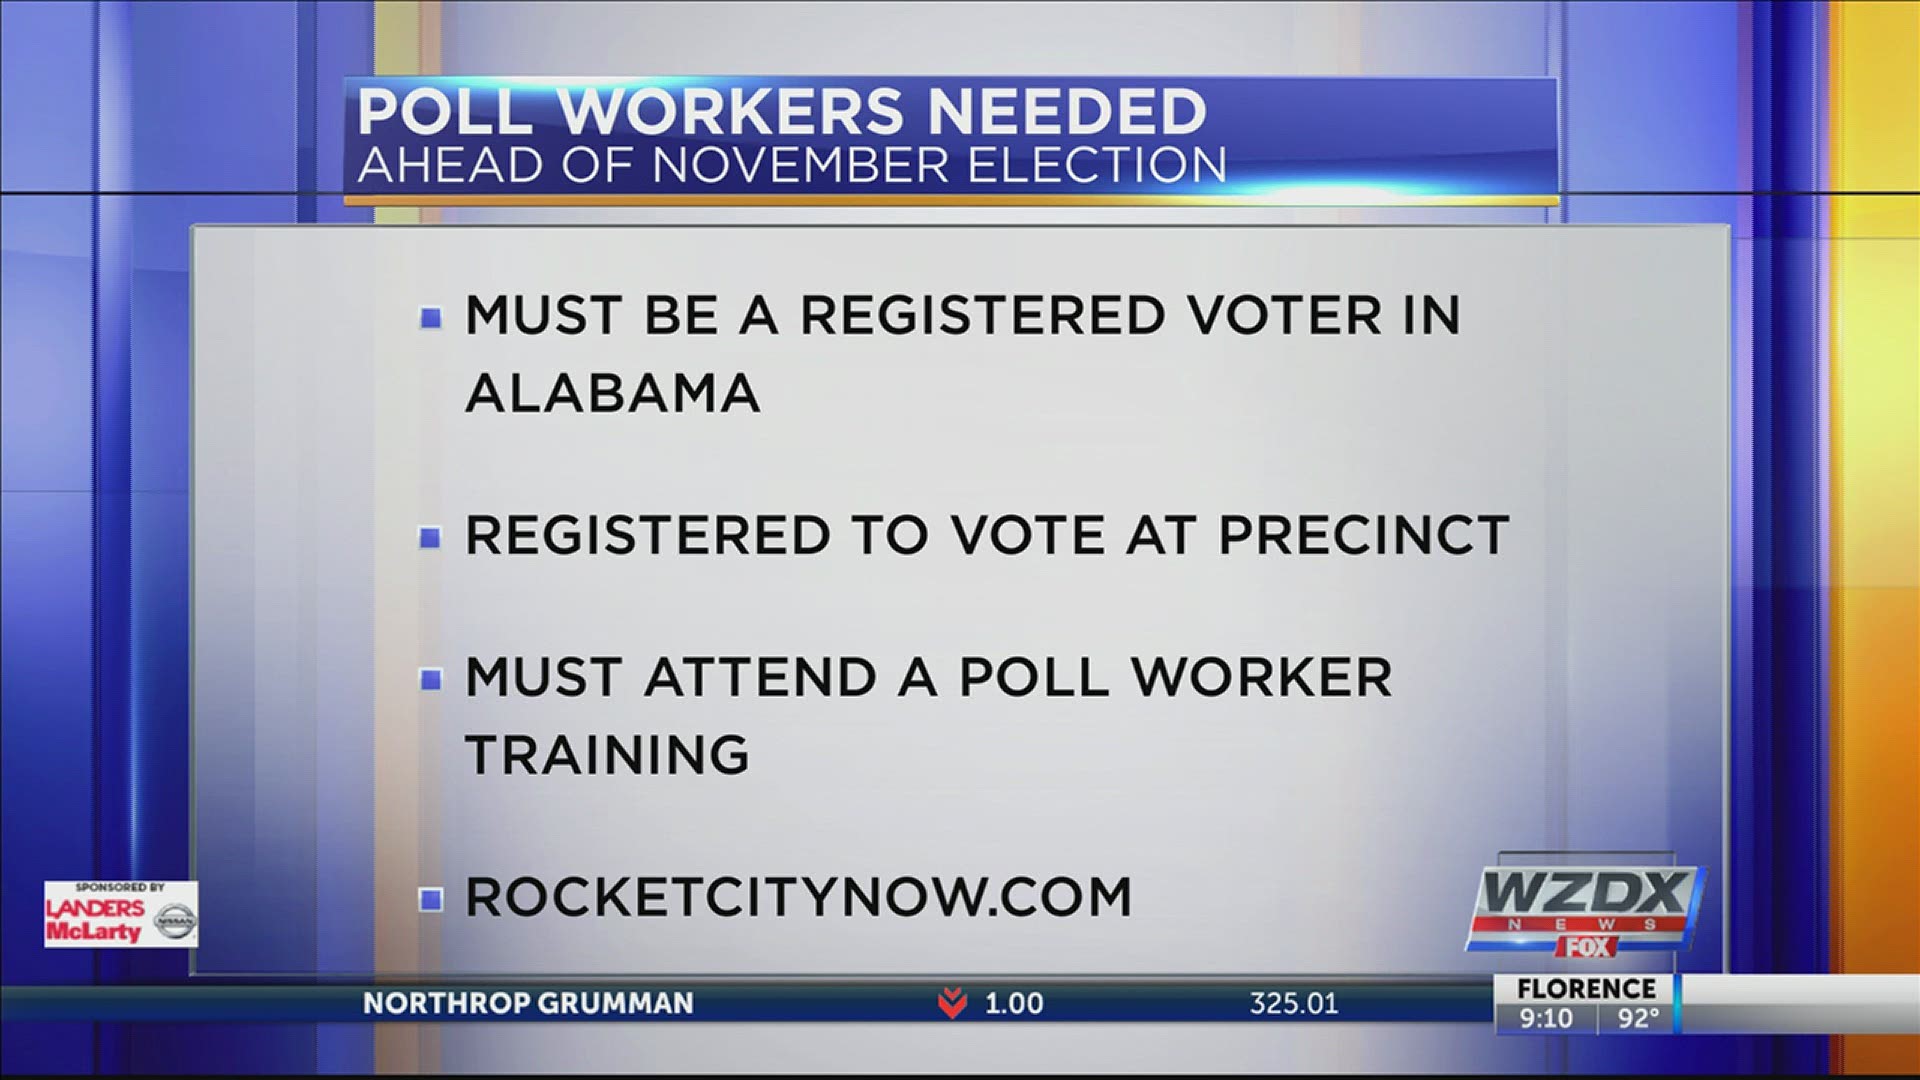 Find out how you can volunteer to be a poll worker (students welcome!)